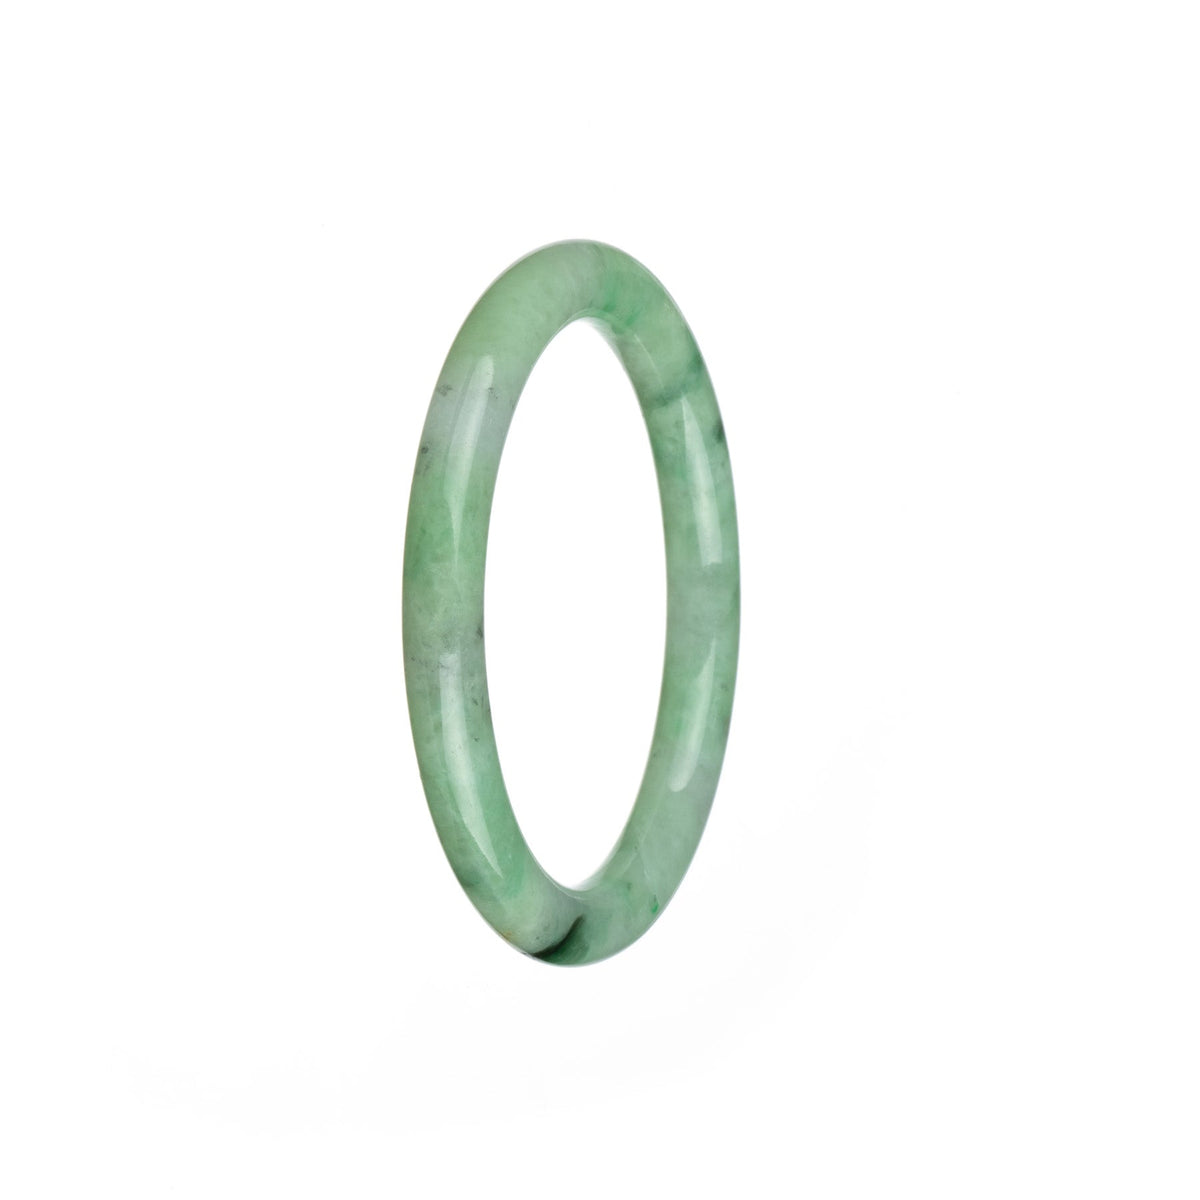 A close-up view of a small, round Burma jade bangle with a vibrant green color and light green spots.